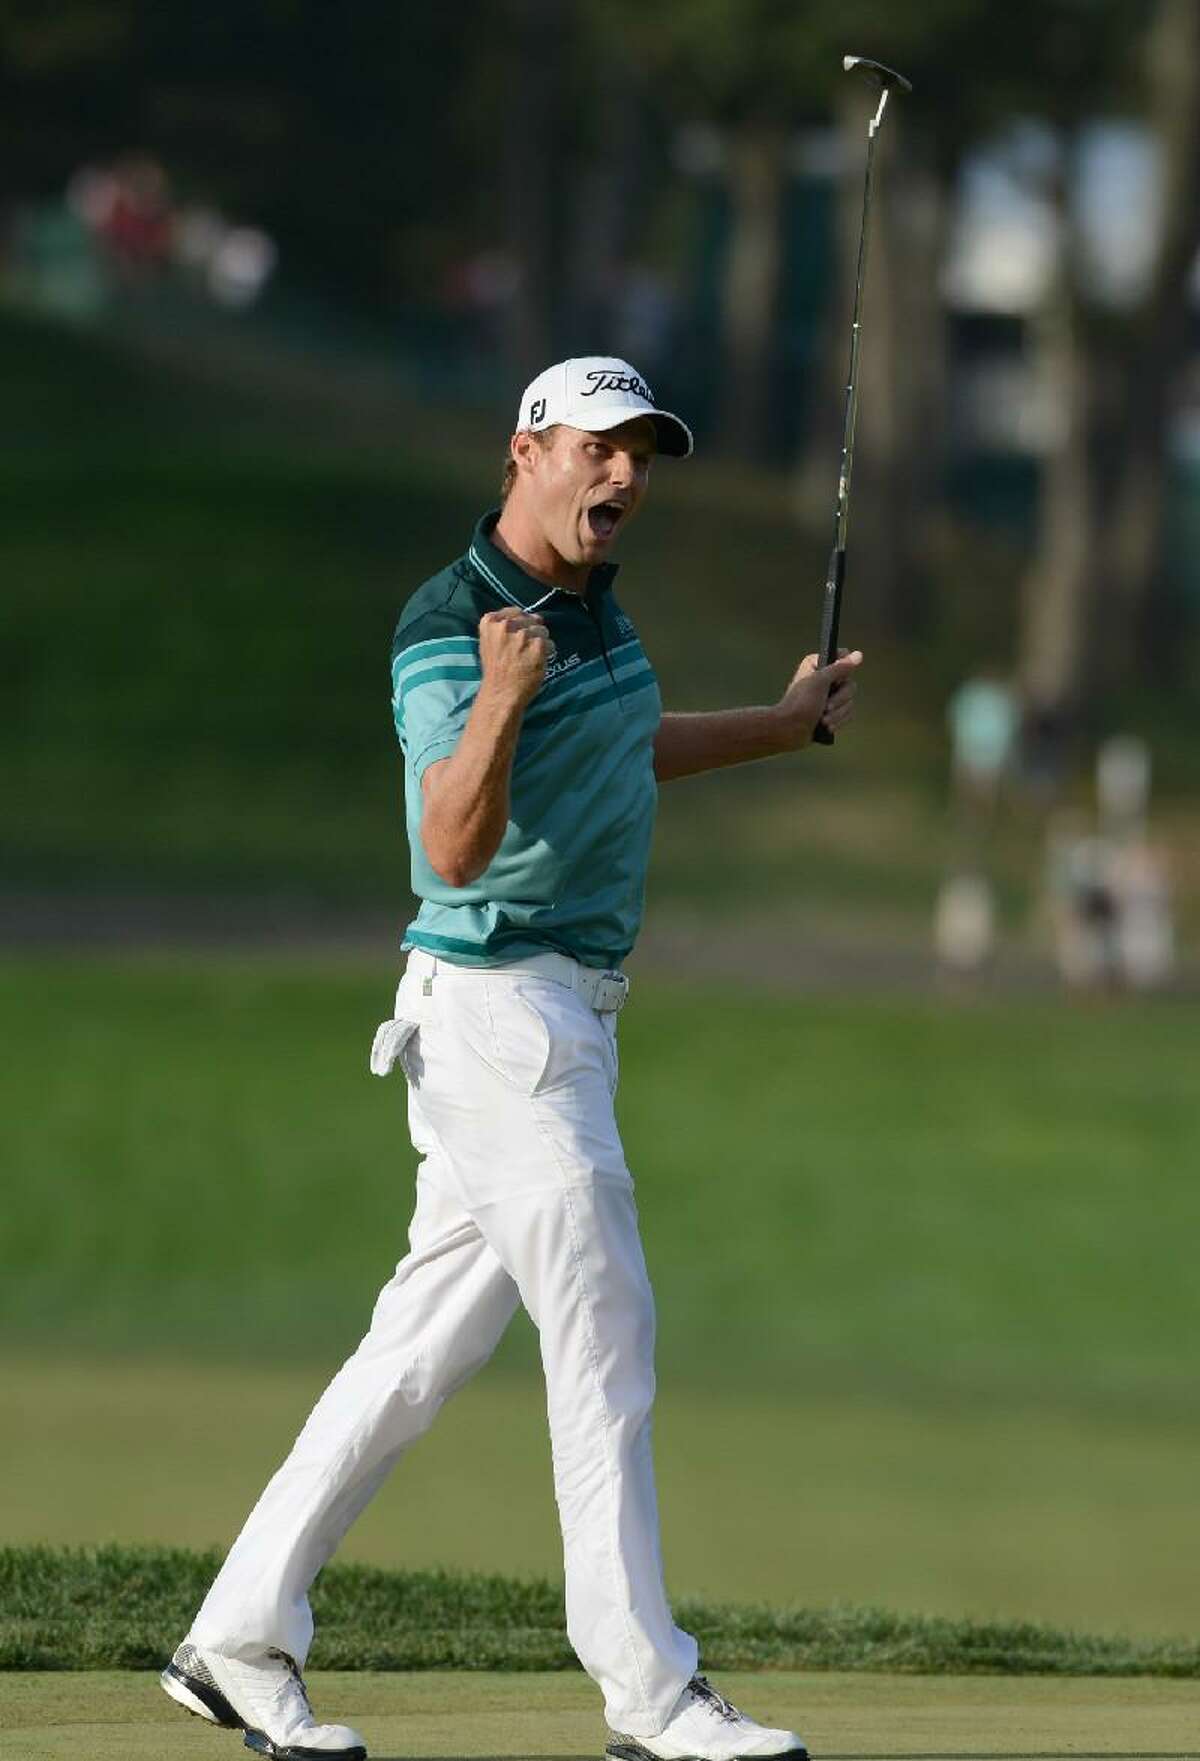 ASSOCIATED PRESS Nick Watney celebrates after sinking a birdie putt on the 18th hole of the fourth round and winning The Barclays golf tournament at Bethpage State Park in Farmingdale, N.Y., Sunday.